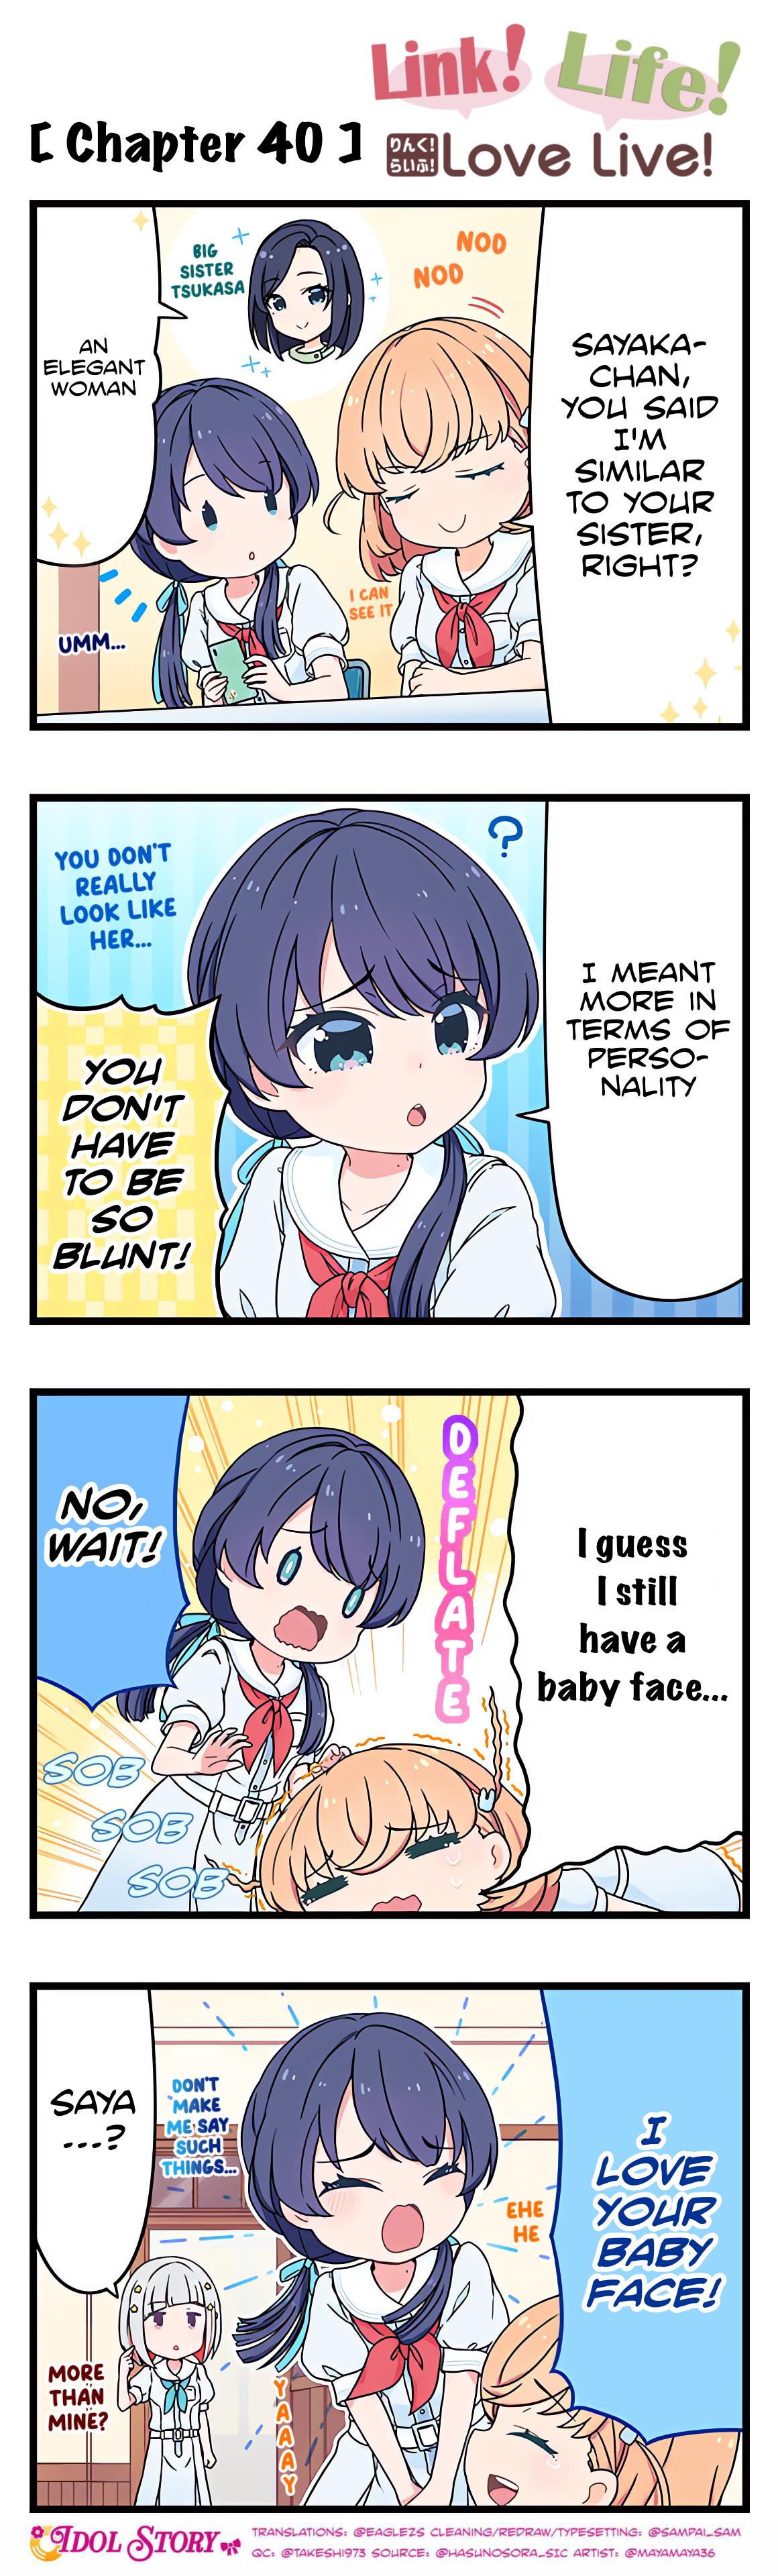 Link! Life! Love Live! Chapter 40 #1